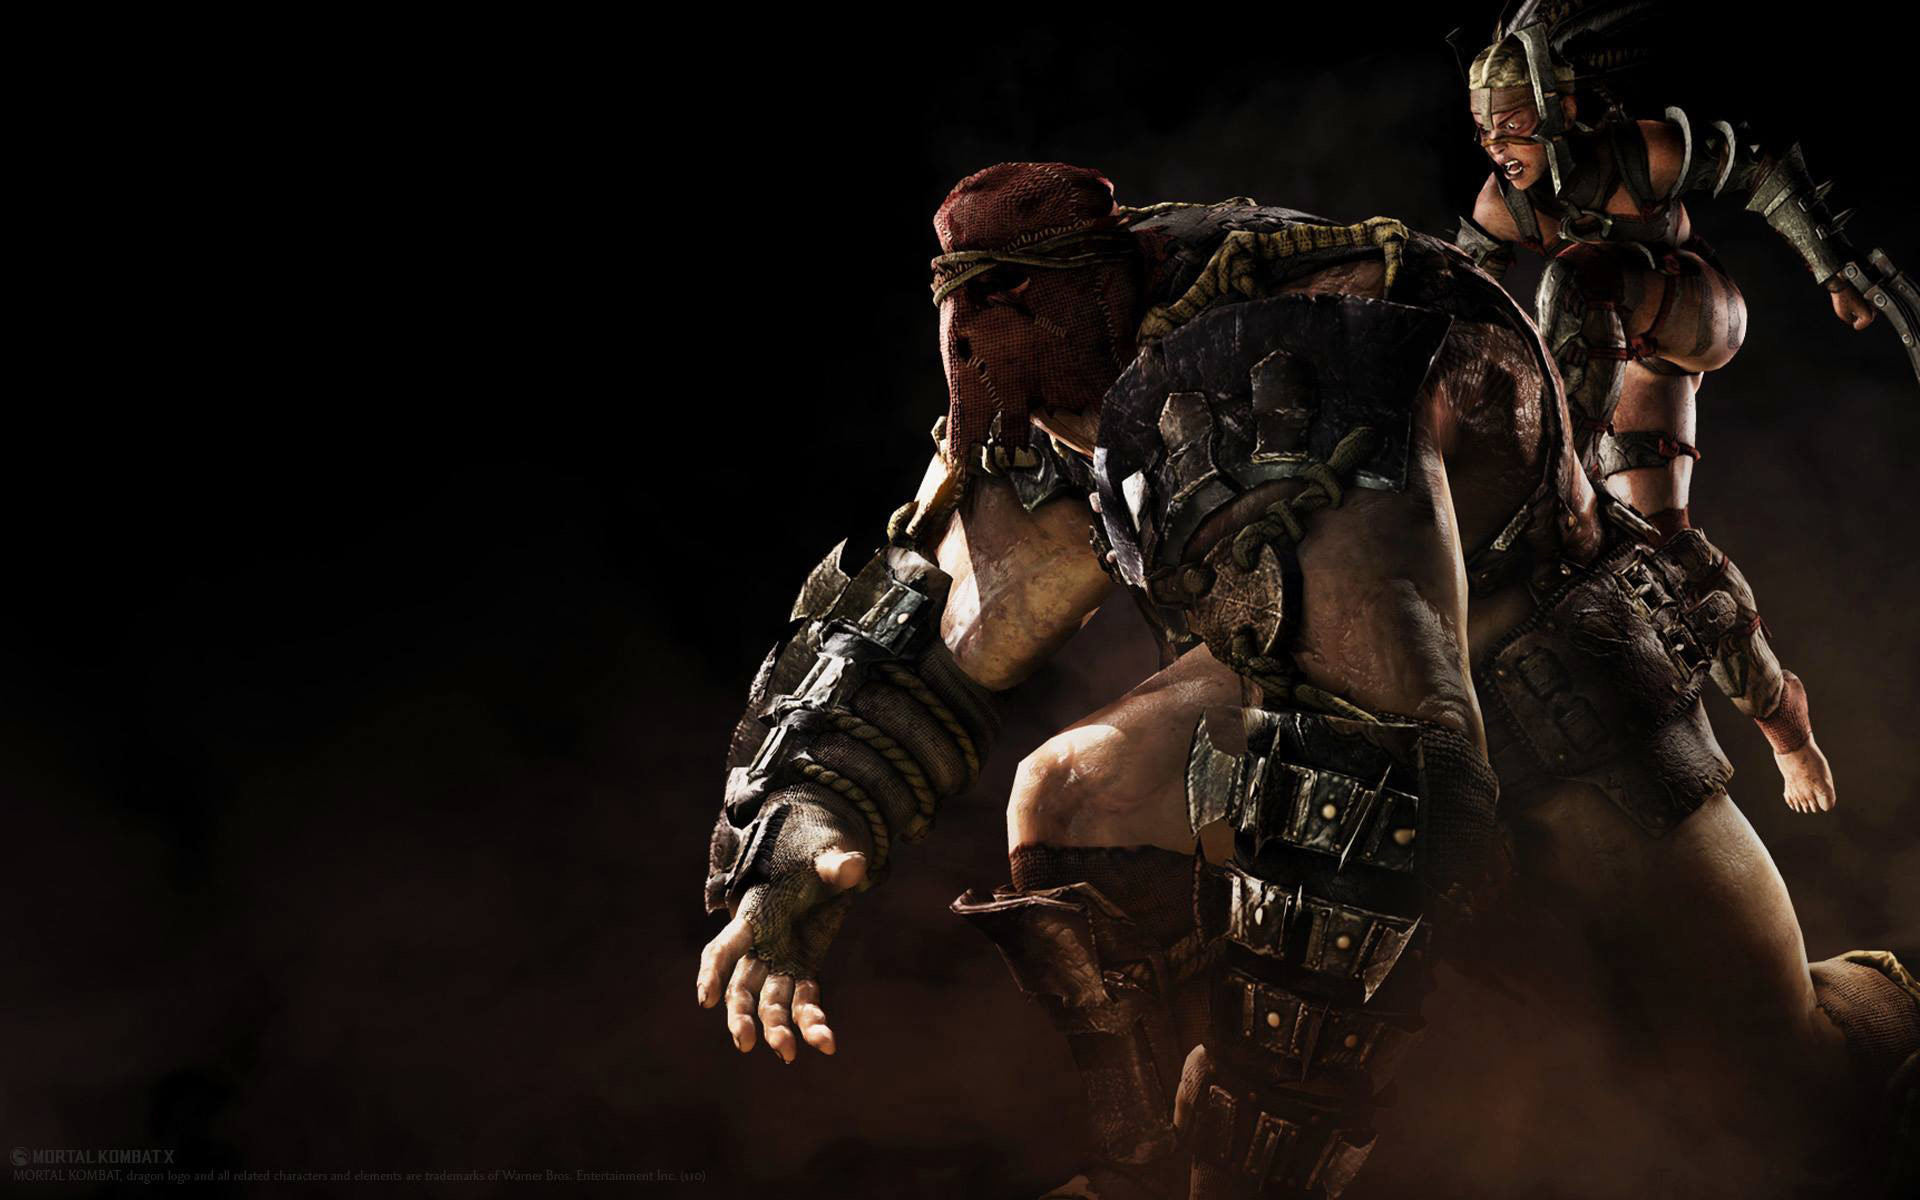 1920x1200 Mortal Kombat X wallpapers featuring old/new characters, image #3